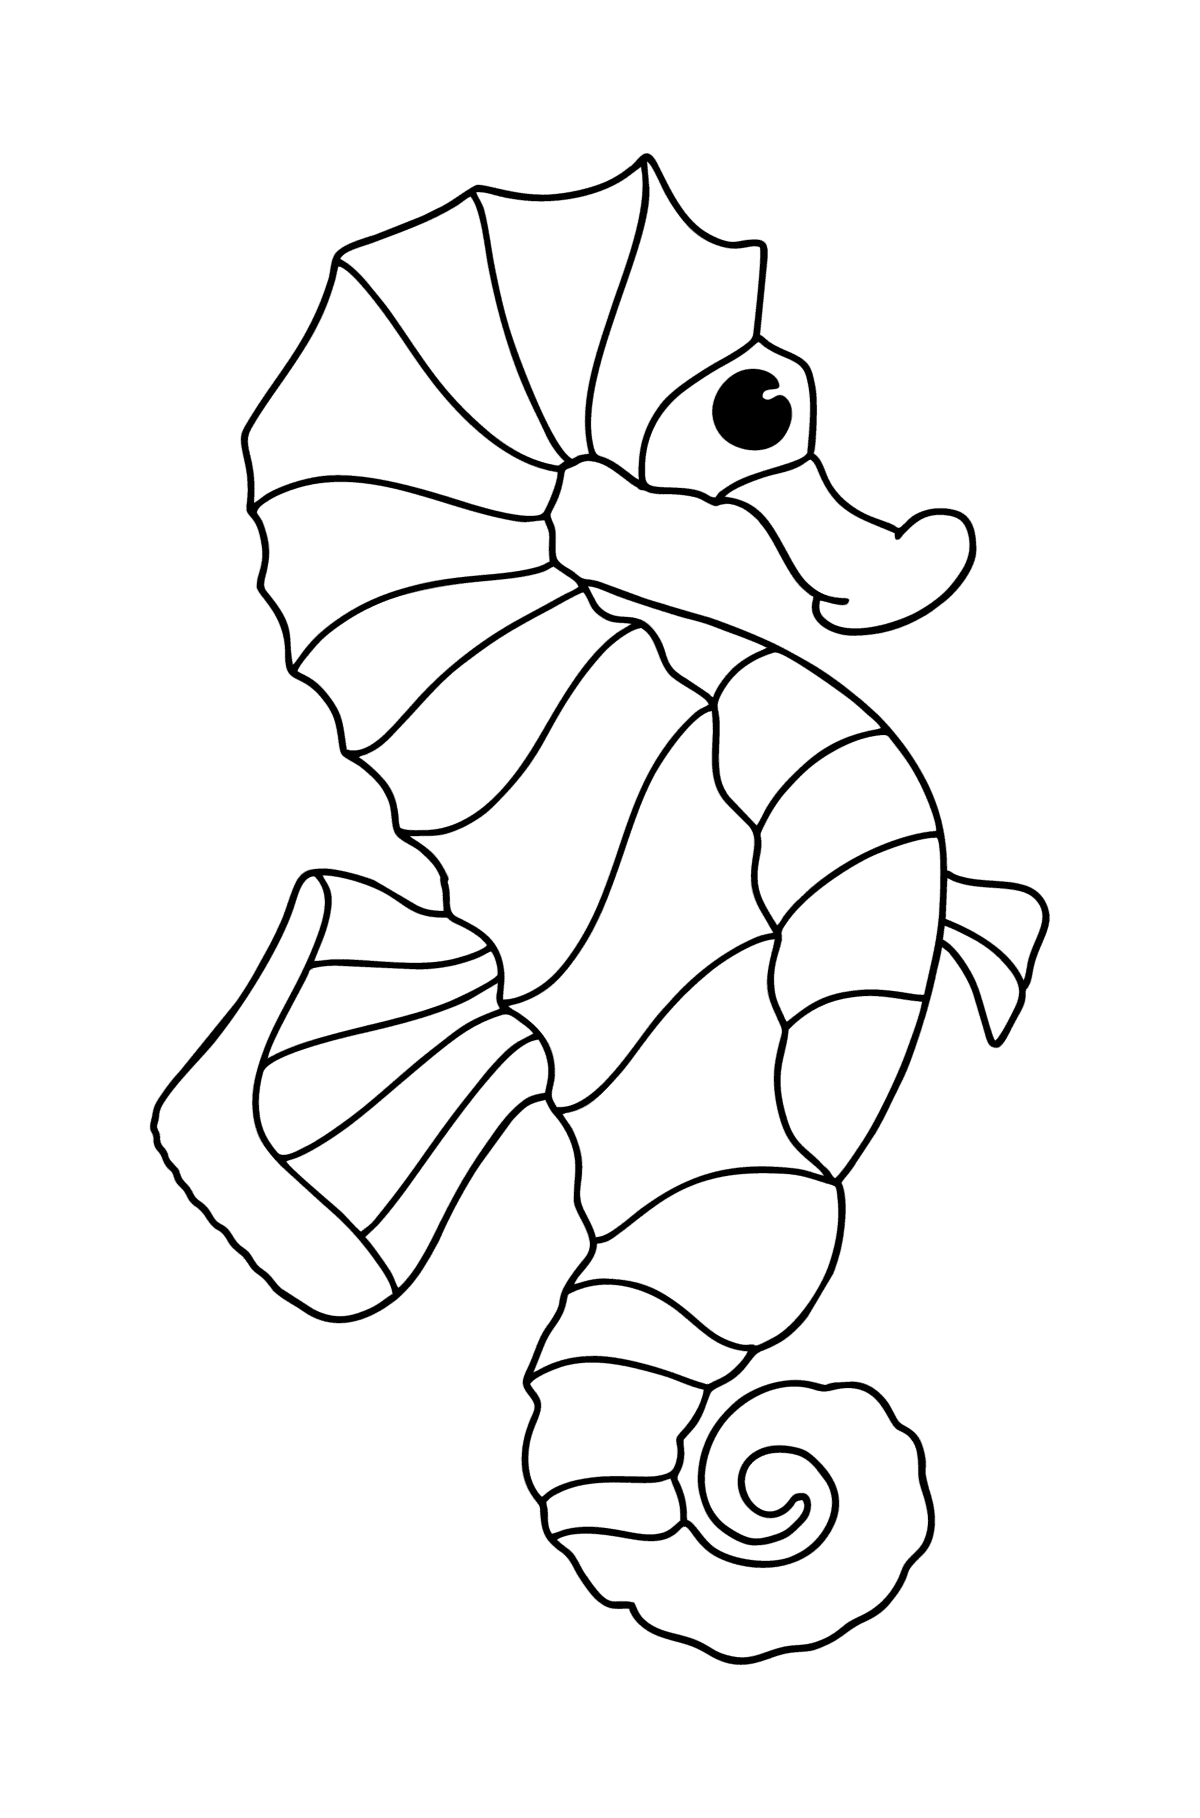 Sea Horse coloring page - Coloring Pages for Kids